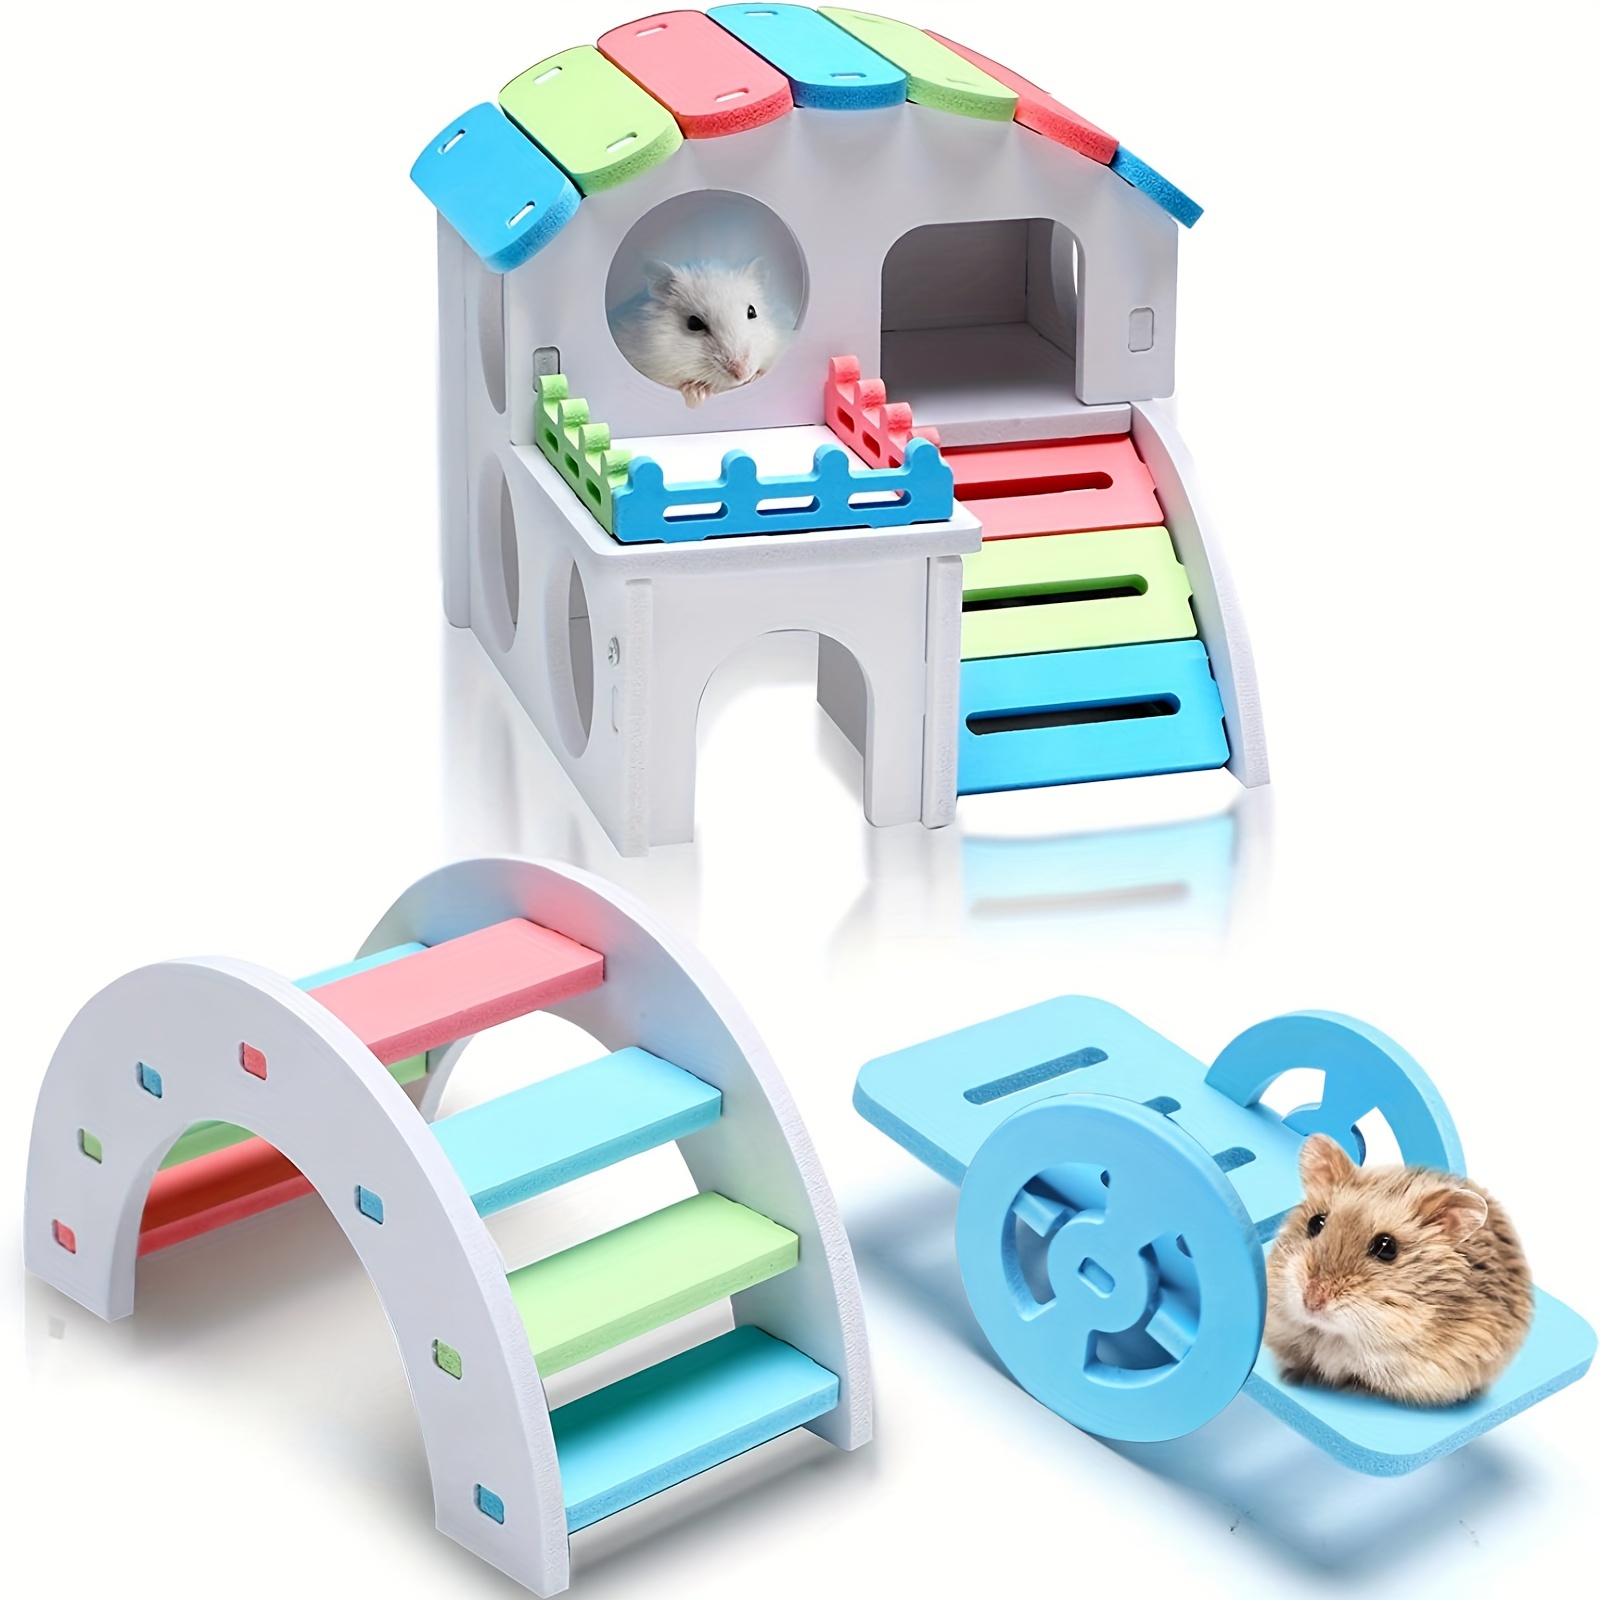 26 Mouse Cage Ideas  mouse cage, hamster diy, hamster toys